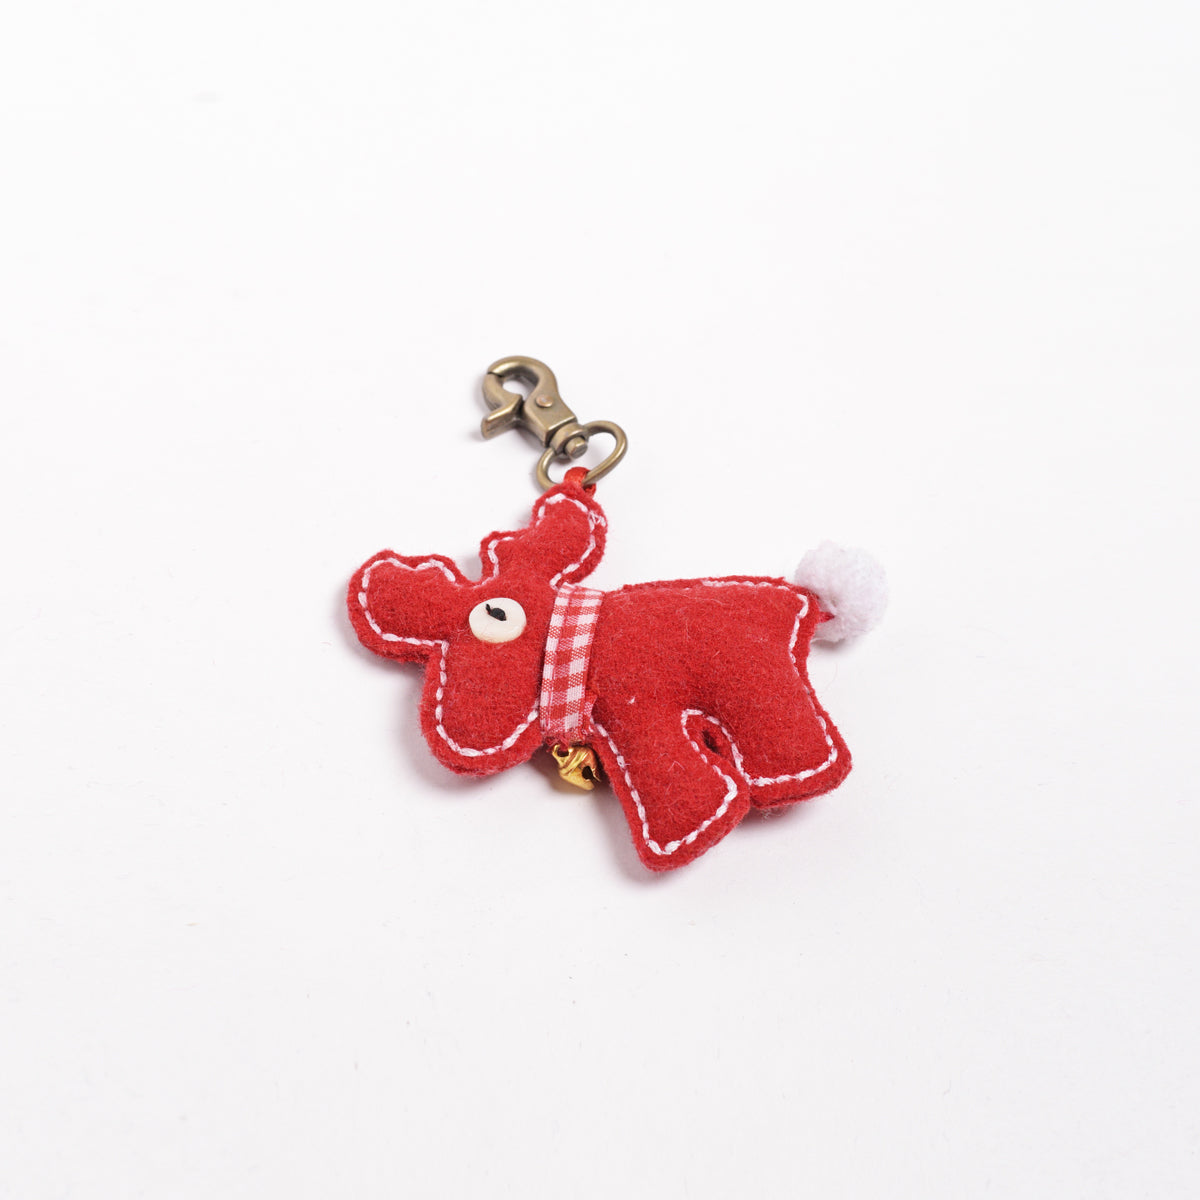 Reindeer, Christmas tree ornament, holiday charm, size 4 inches or 10 cms